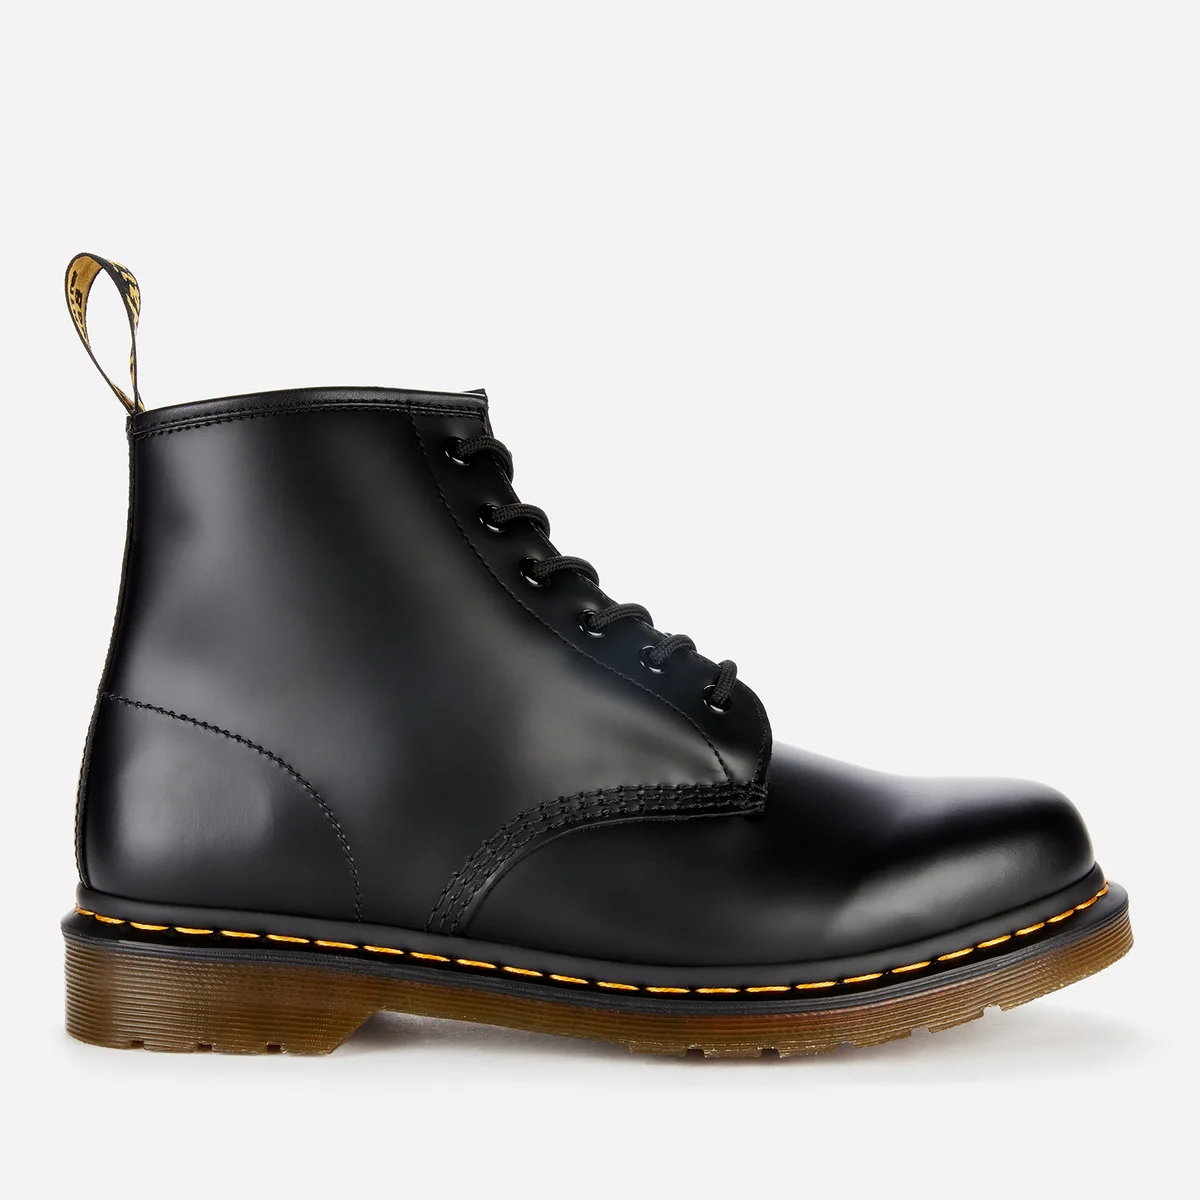 Dr. Martens 101 Smooth Leather 6-Eye Boots - Black Image 1